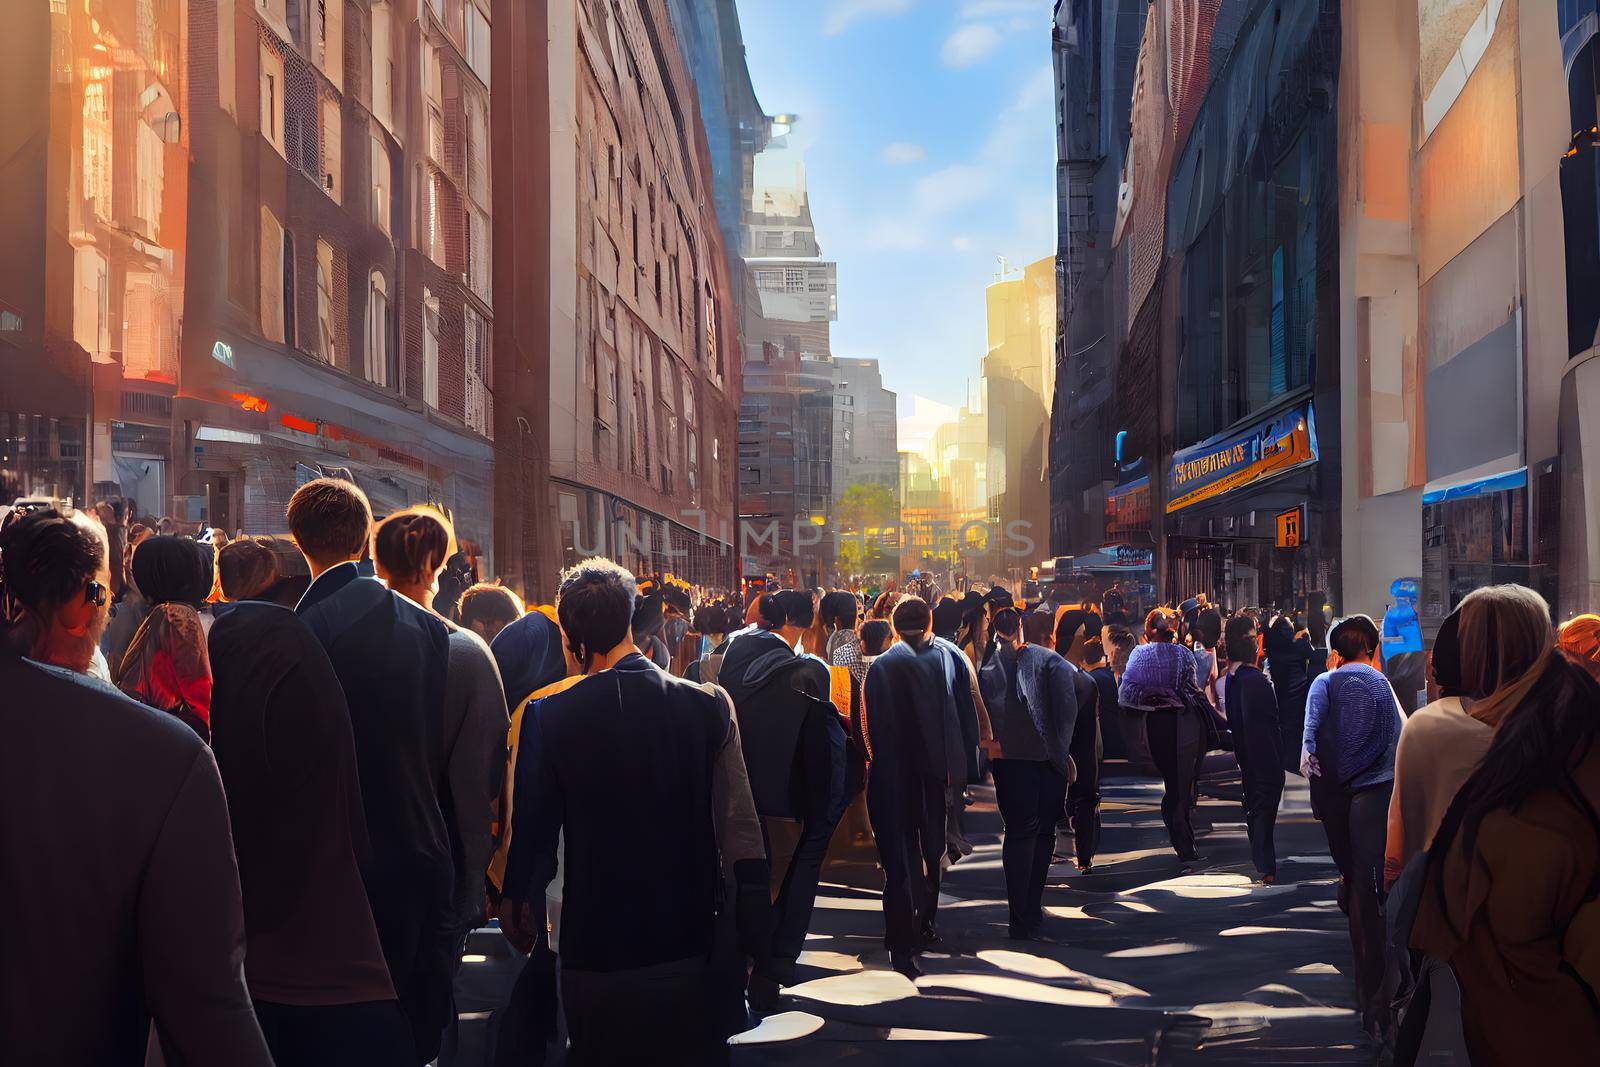 crowd of office suit wearing people walking to work at downtown street, neural network generated art by z1b